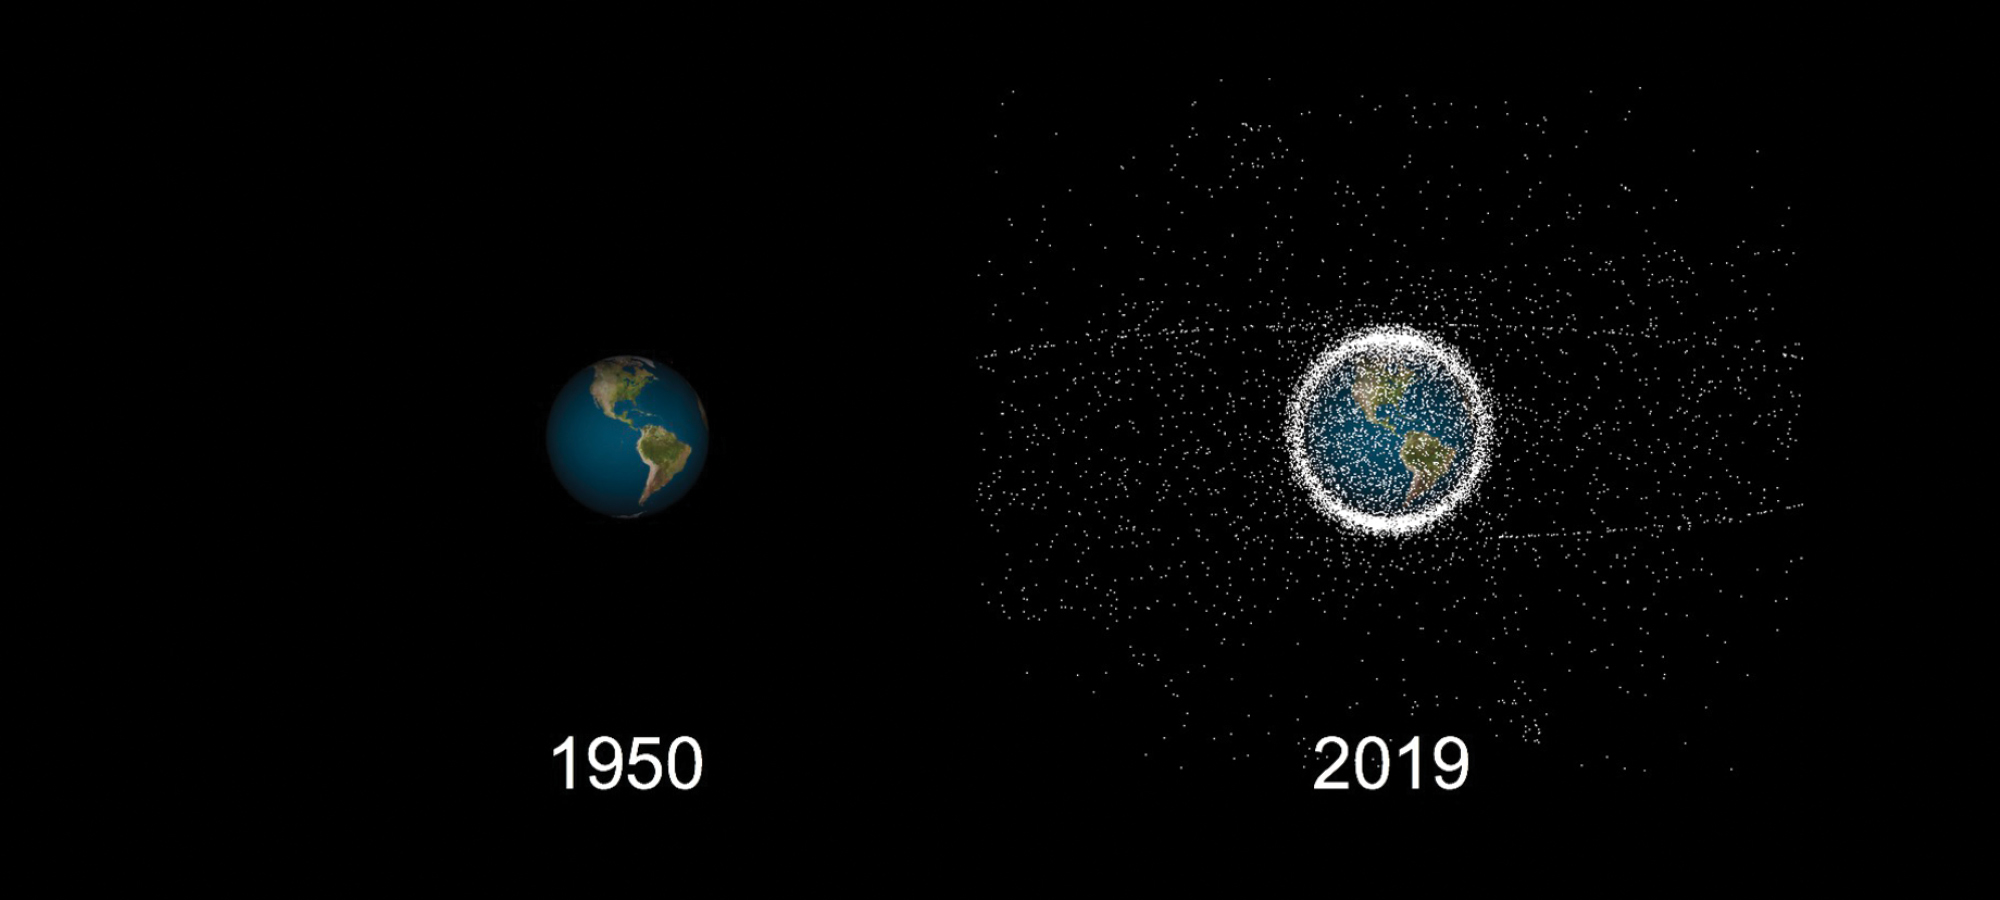 Earth from space 1950 vs 2019